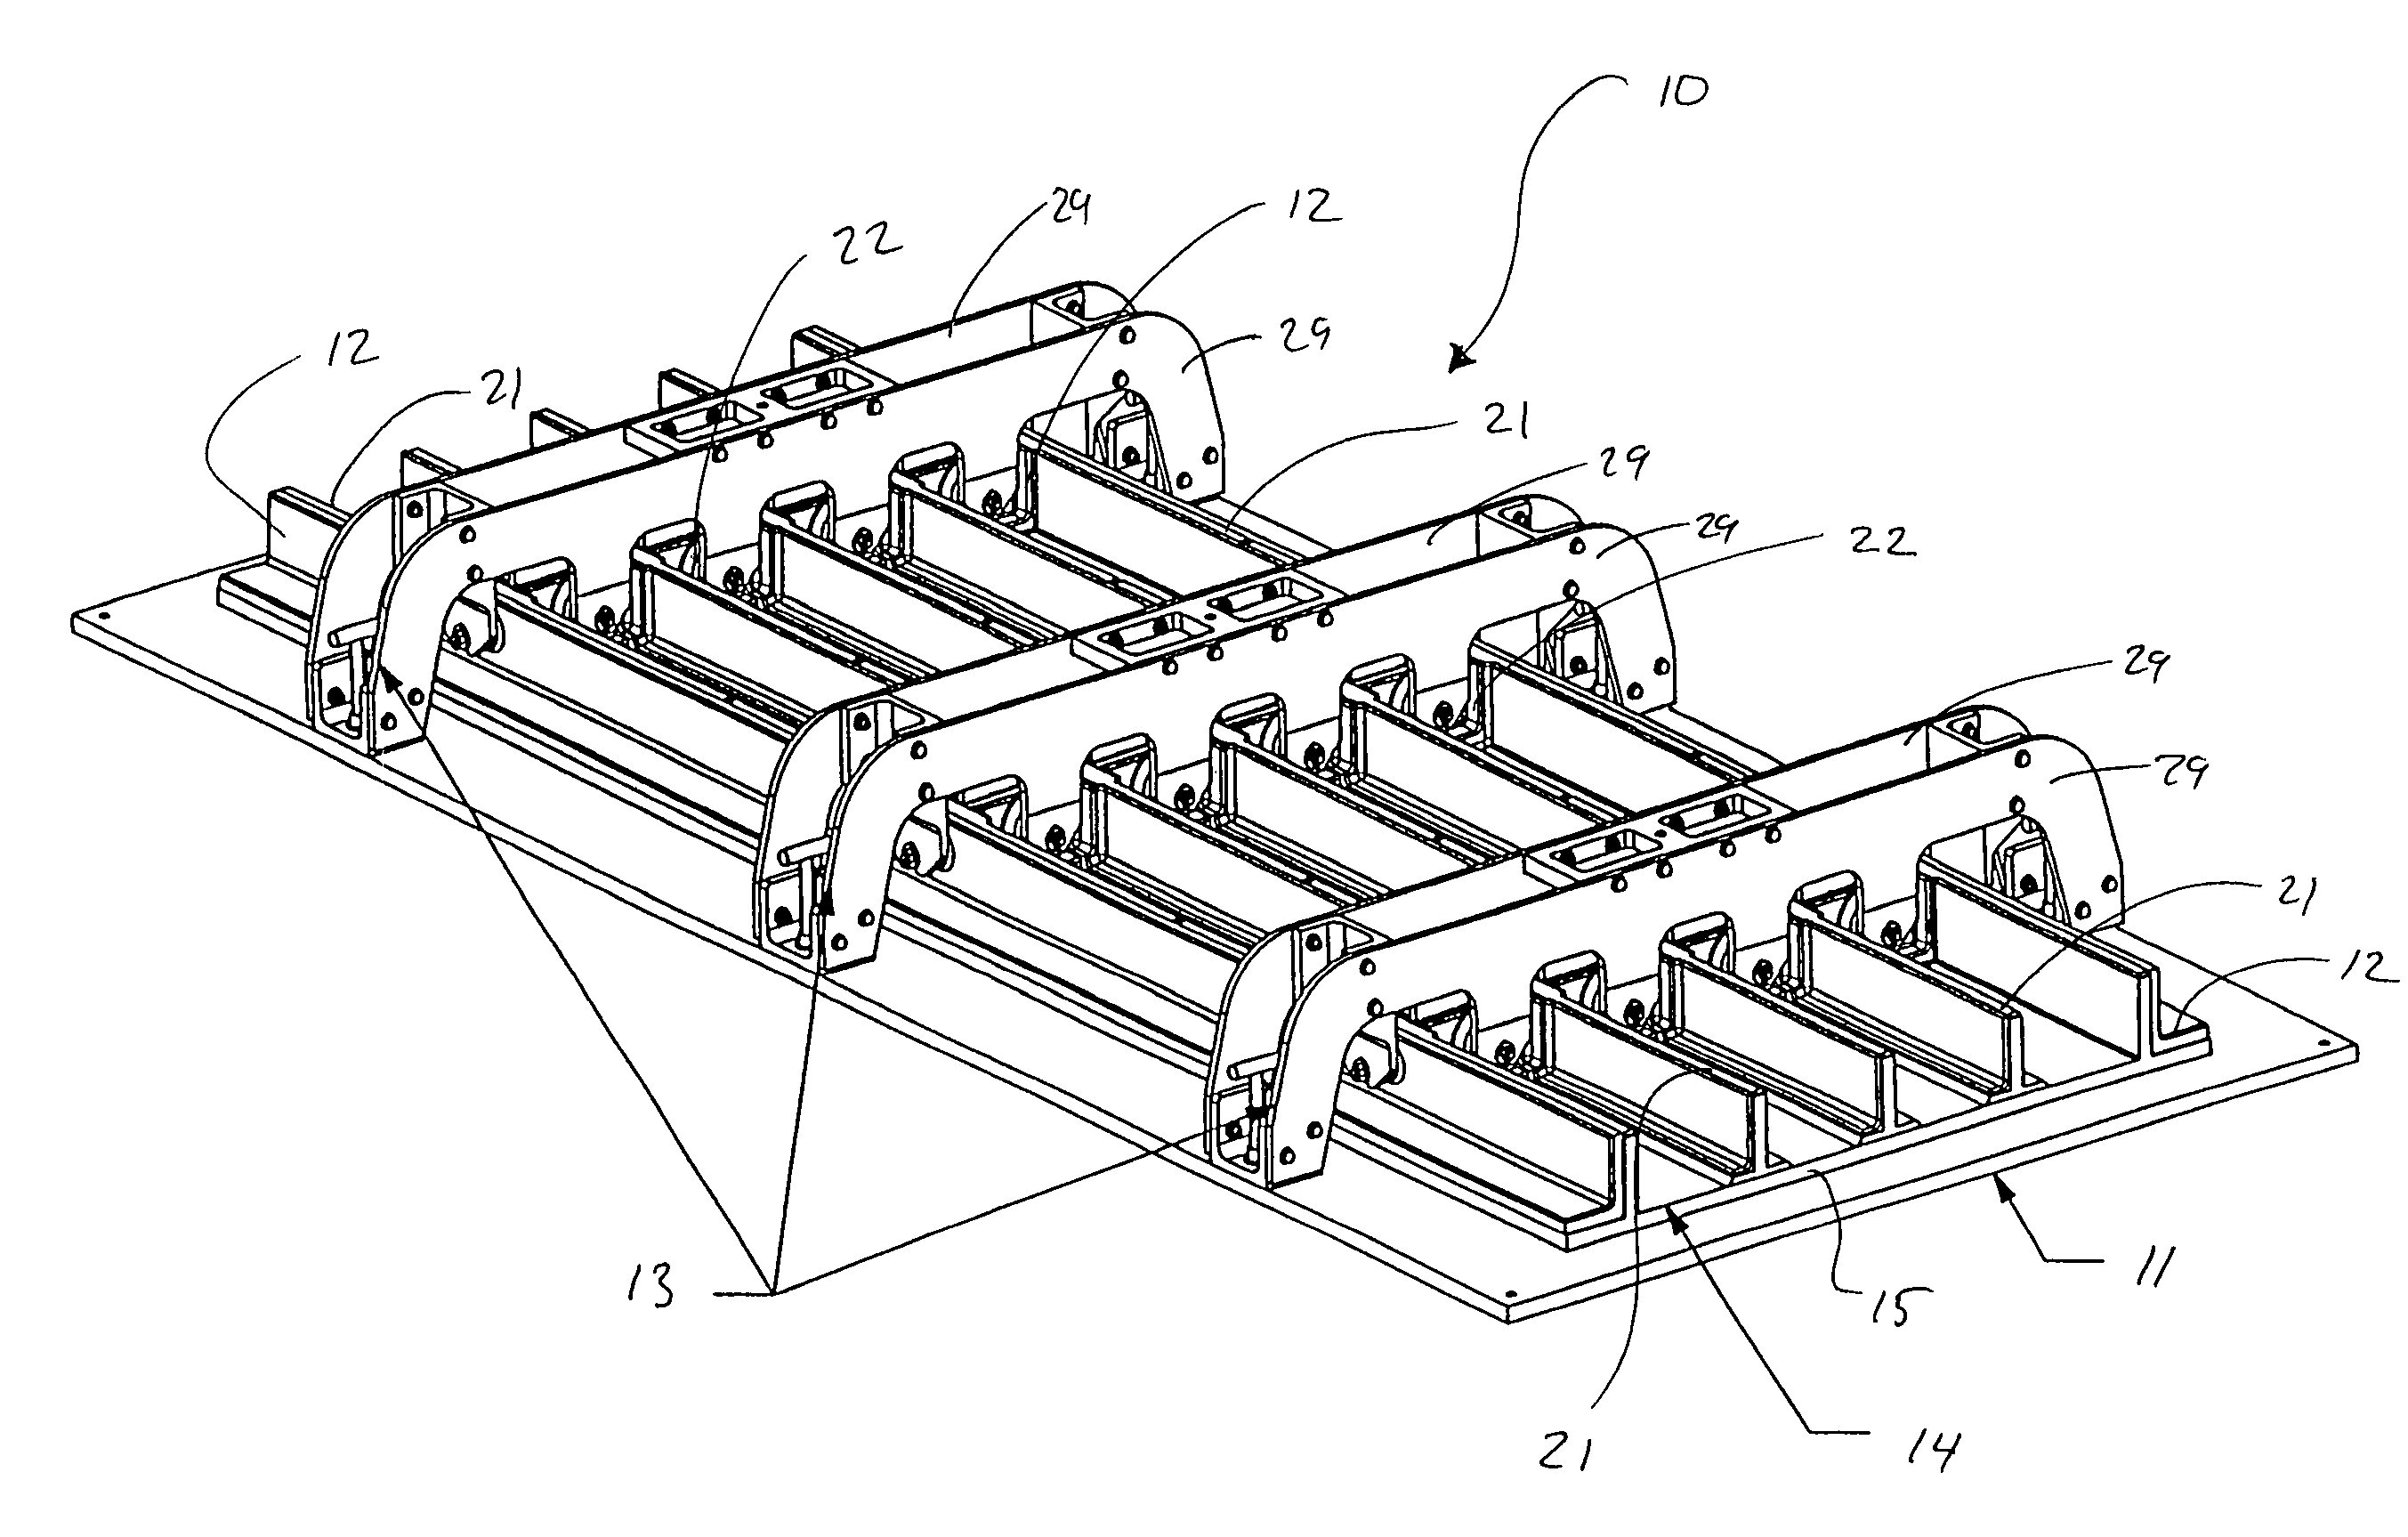 Resin infusion mold tool system and vacuum assisted resin transfer molding with subsequent pressure bleed